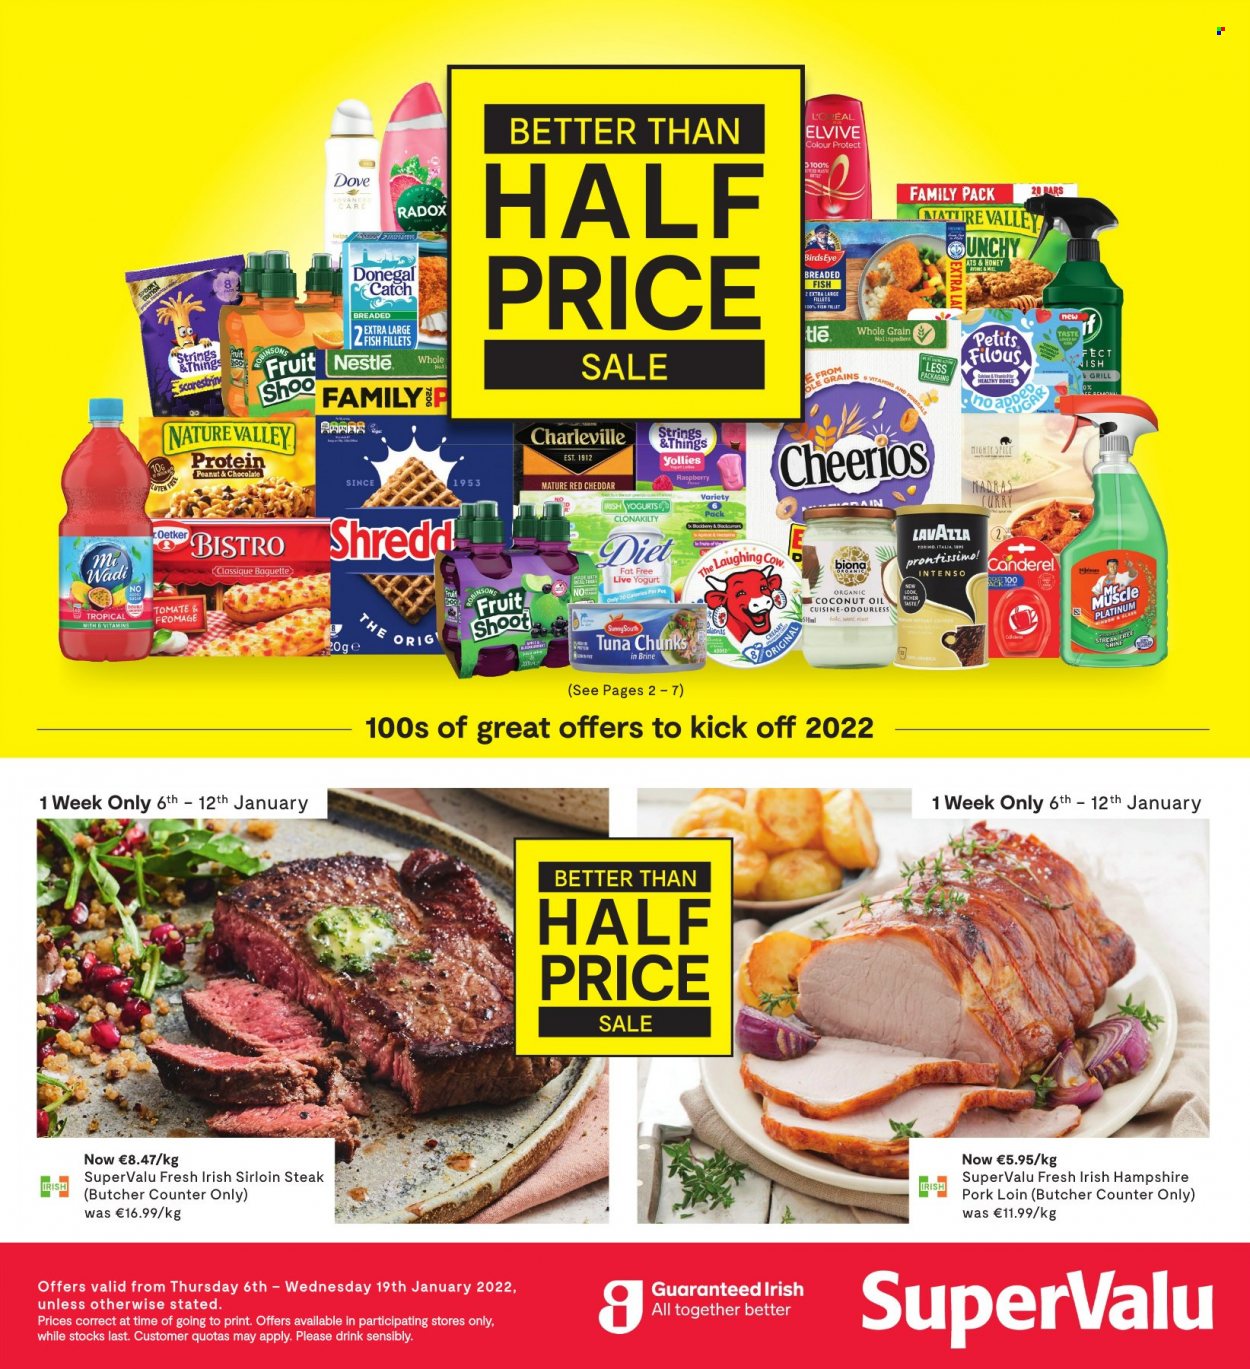 thumbnail - SuperValu offer  - 06.01.2022 - 19.01.2022 - Sales products - baguette, fish fillets, tuna, fish, Bird's Eye, breaded fish, cheddar, cheese, yoghurt, probiotic yoghurt, Donegal Catch, Nestlé, chocolate, sugar, Canderel, Cheerios, Nature Valley, spice, coconut oil, oil, honey, Intenso, Lavazza, beef sirloin, steak, sirloin steak, pork loin, pork meat, Dove, Radox. Page 1.